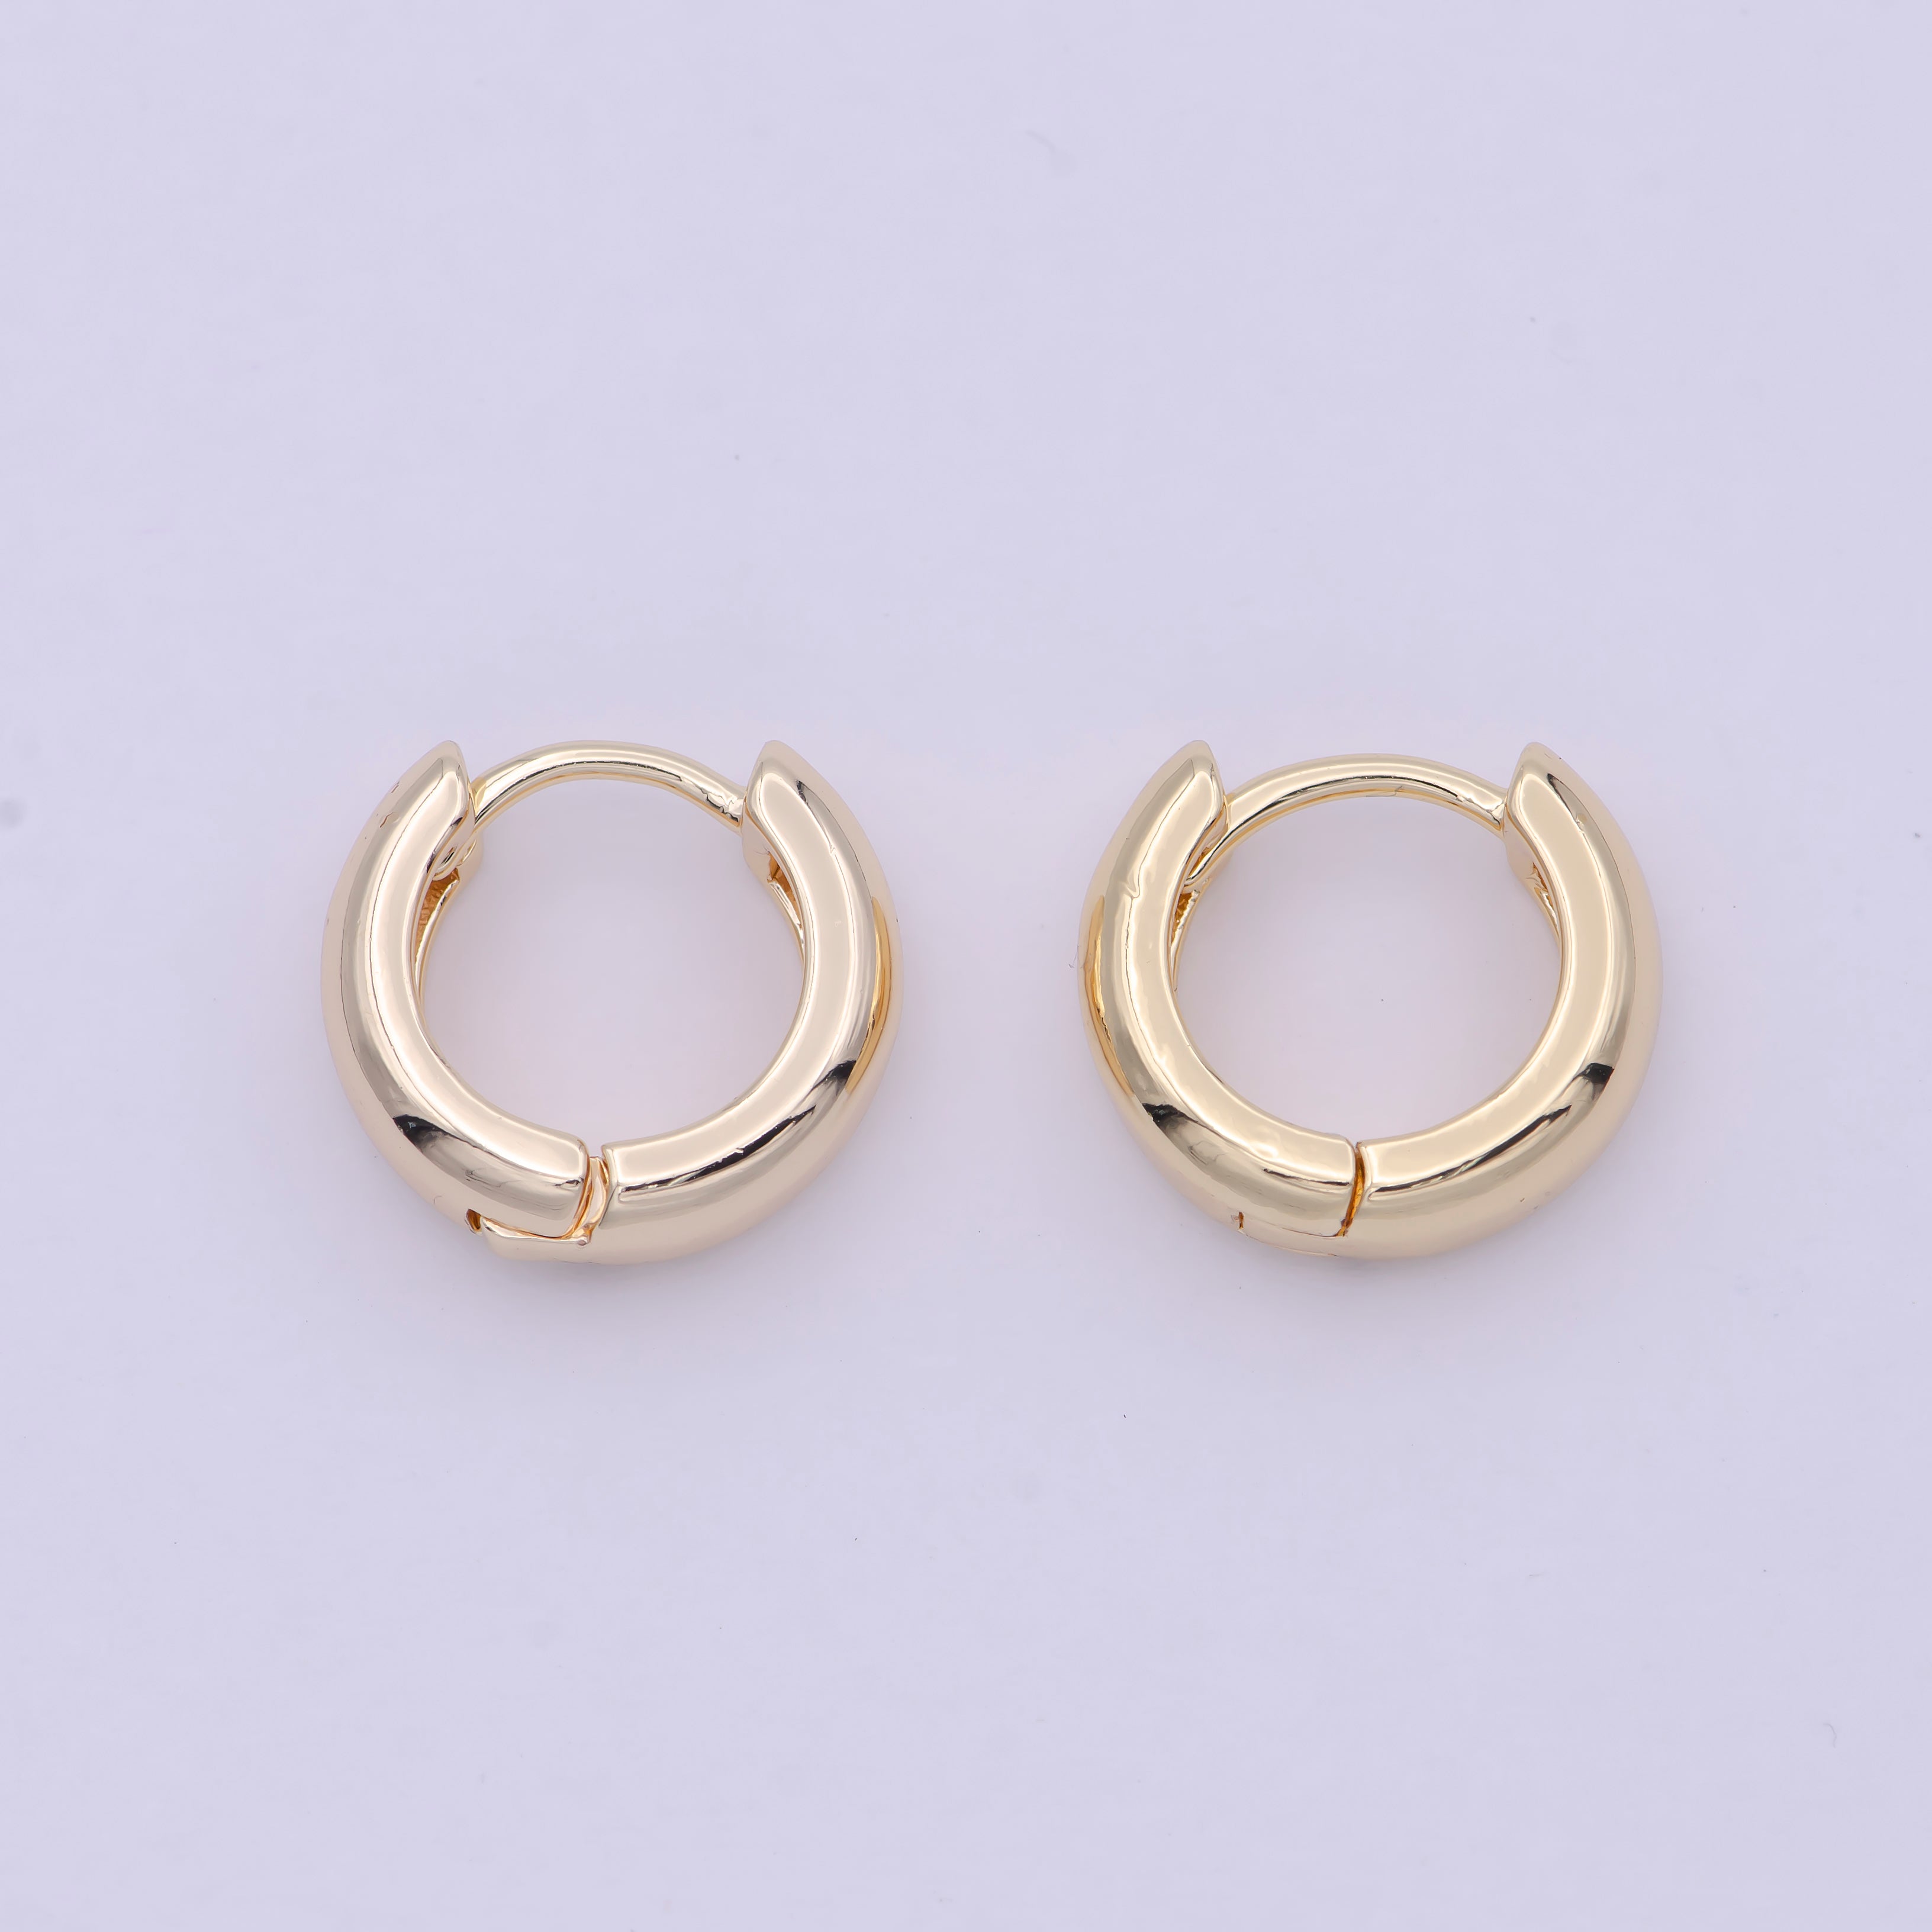 1 Pair 14K Gold Filled Small Lever Back Hoop Earrings 14mm, 16mm, 18mm ,23mm Earring Hypoallergenic Jewelry - DLUXCA